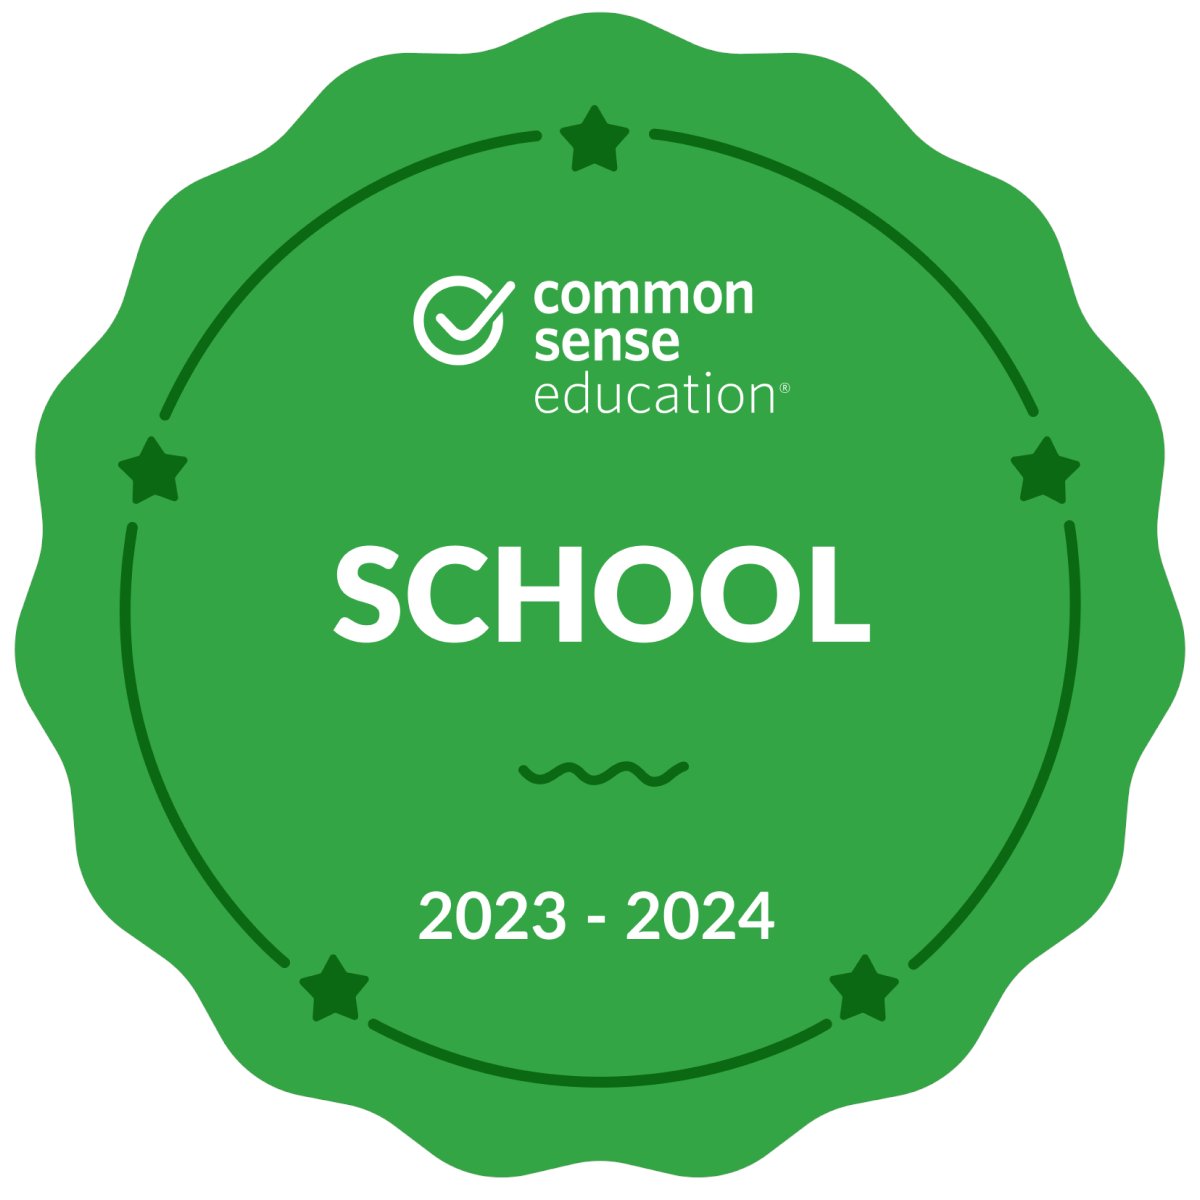 Reedy Creek MMS is once again a Common Sense Media Certified School! This recognizes our commitment to teaching digital citizenship to our students & school community. #CertifiedSince2016 #EagleProud #CenterForTheDigitalSciences #CommonSenseSchool @wcpssmagnets @STEM_WCPSS @WCPSS